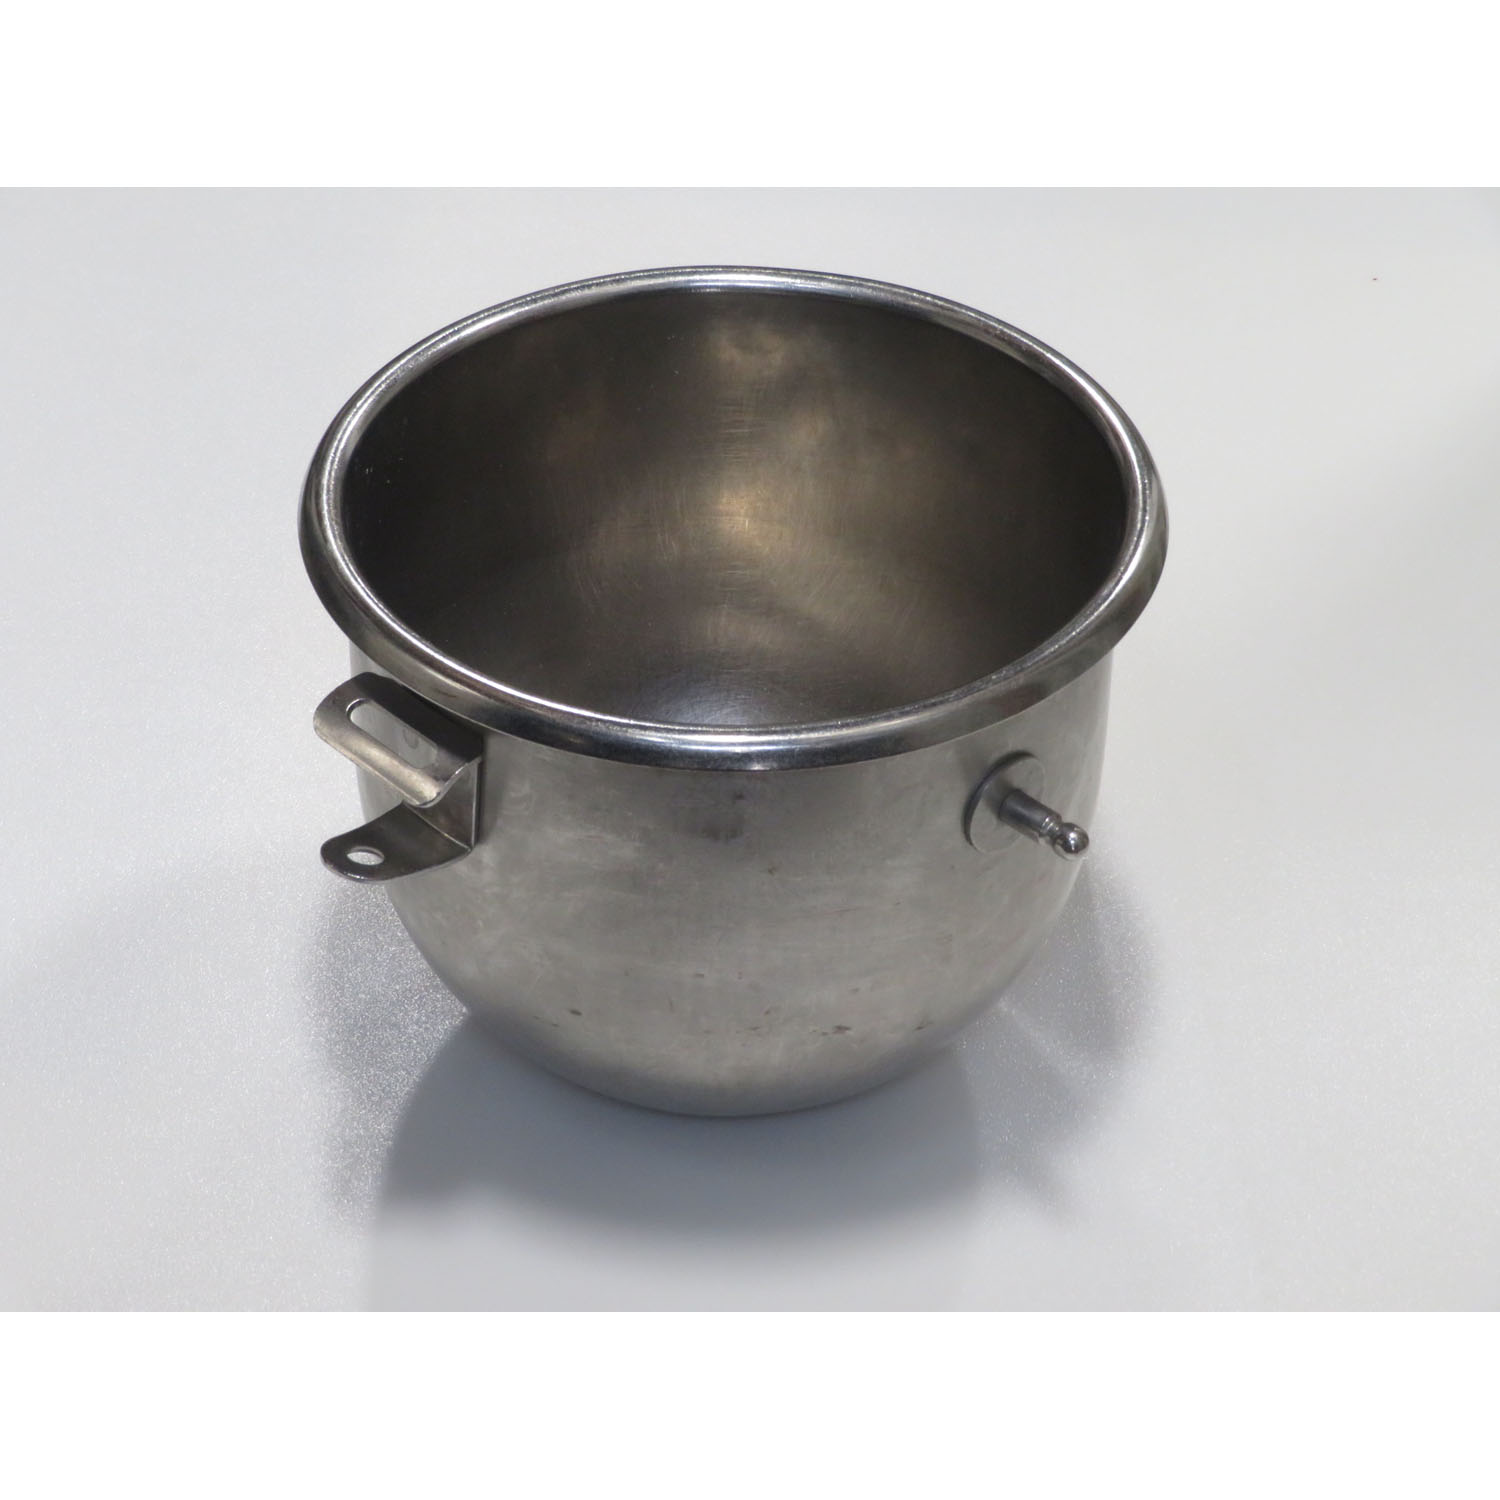 Hobart 00-295644 12 Quart Bowl to Fit A200 Mixer, Used Excellent Condition image 1